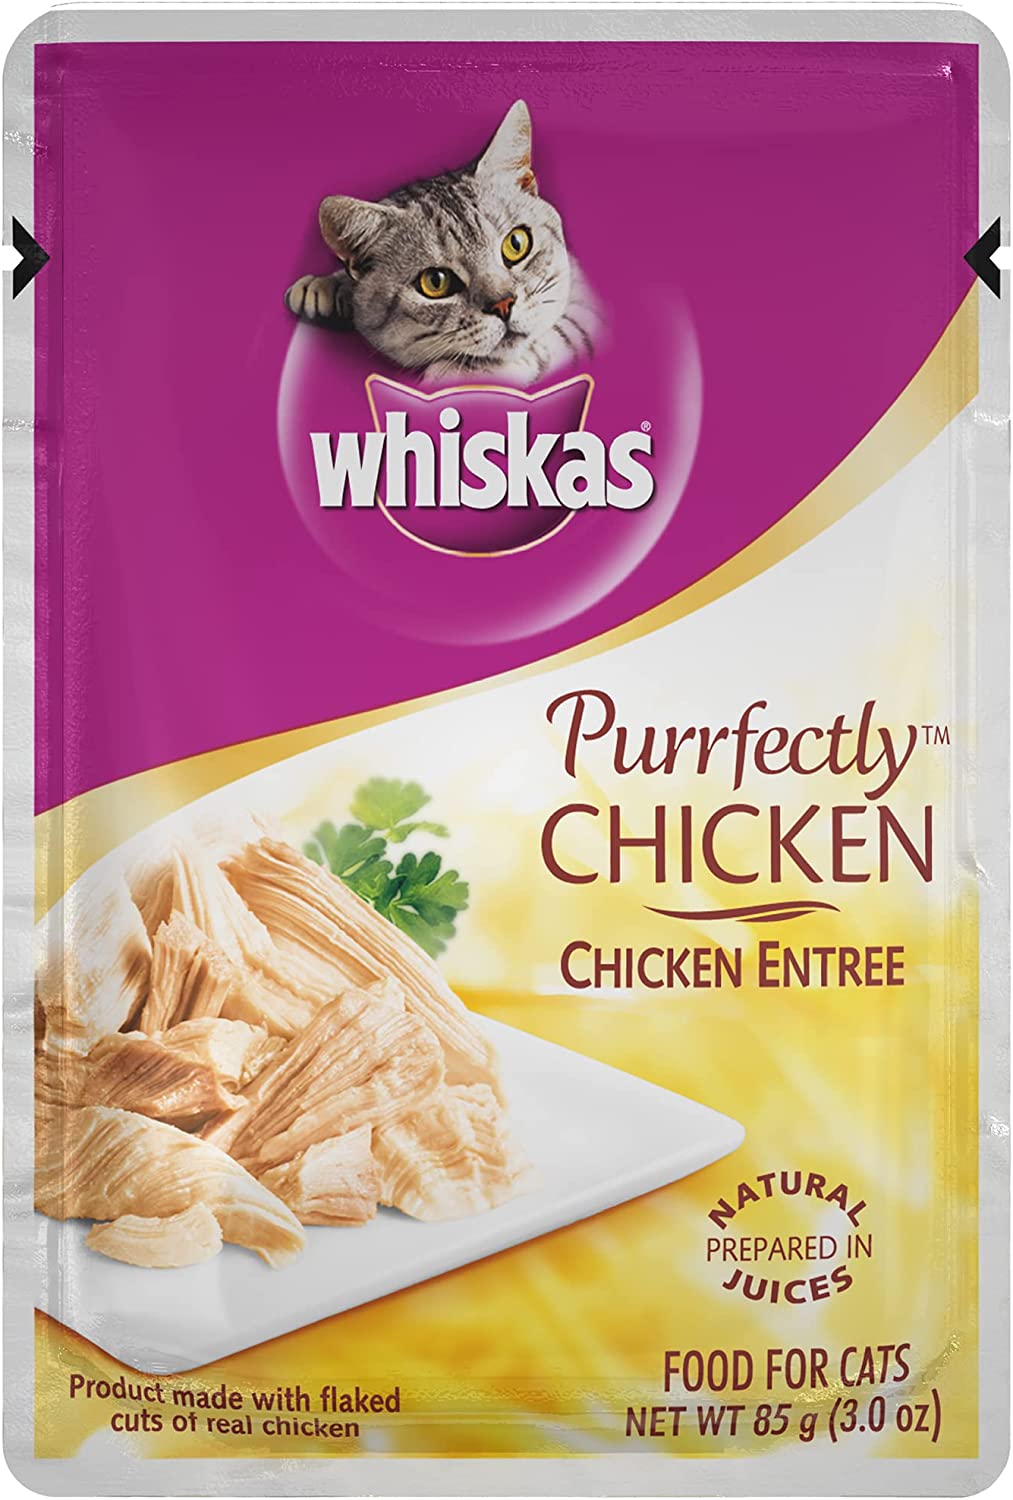 Whiskas Purrfectly Chicken Entree Wet Cat Food